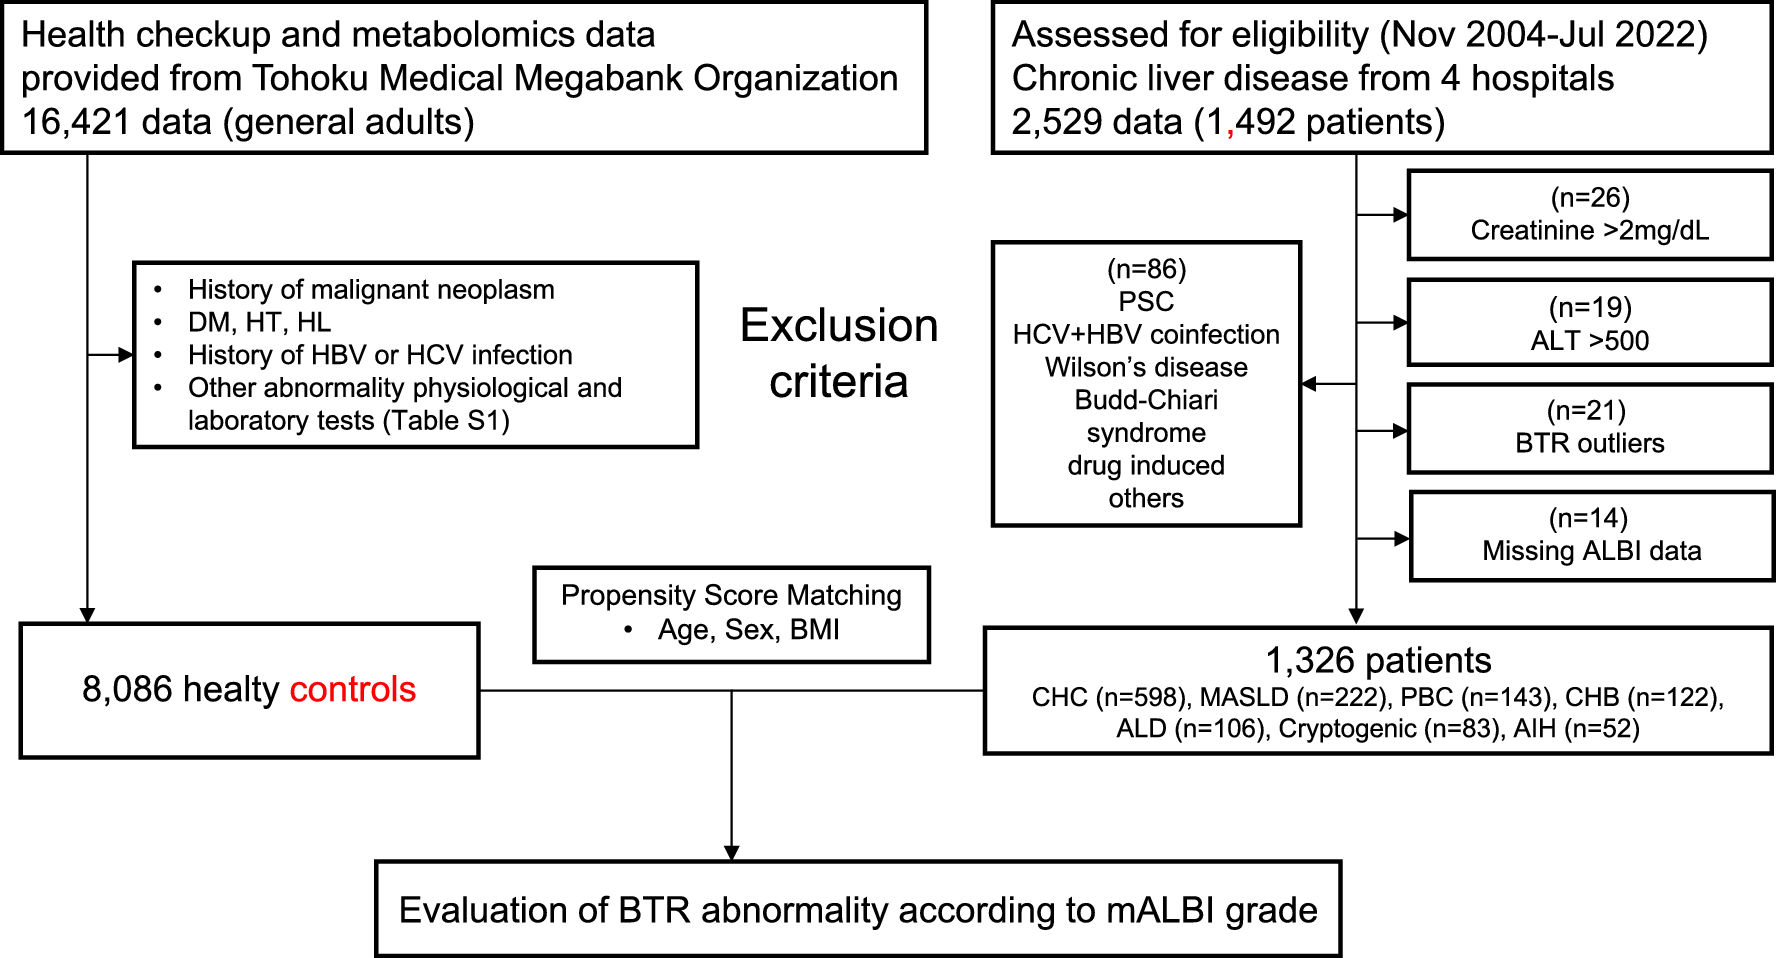 Differences in branched-chain amino acid to tyrosine ratio (BTR) among etiologies of chronic liver disease progression compared to healthy adults.